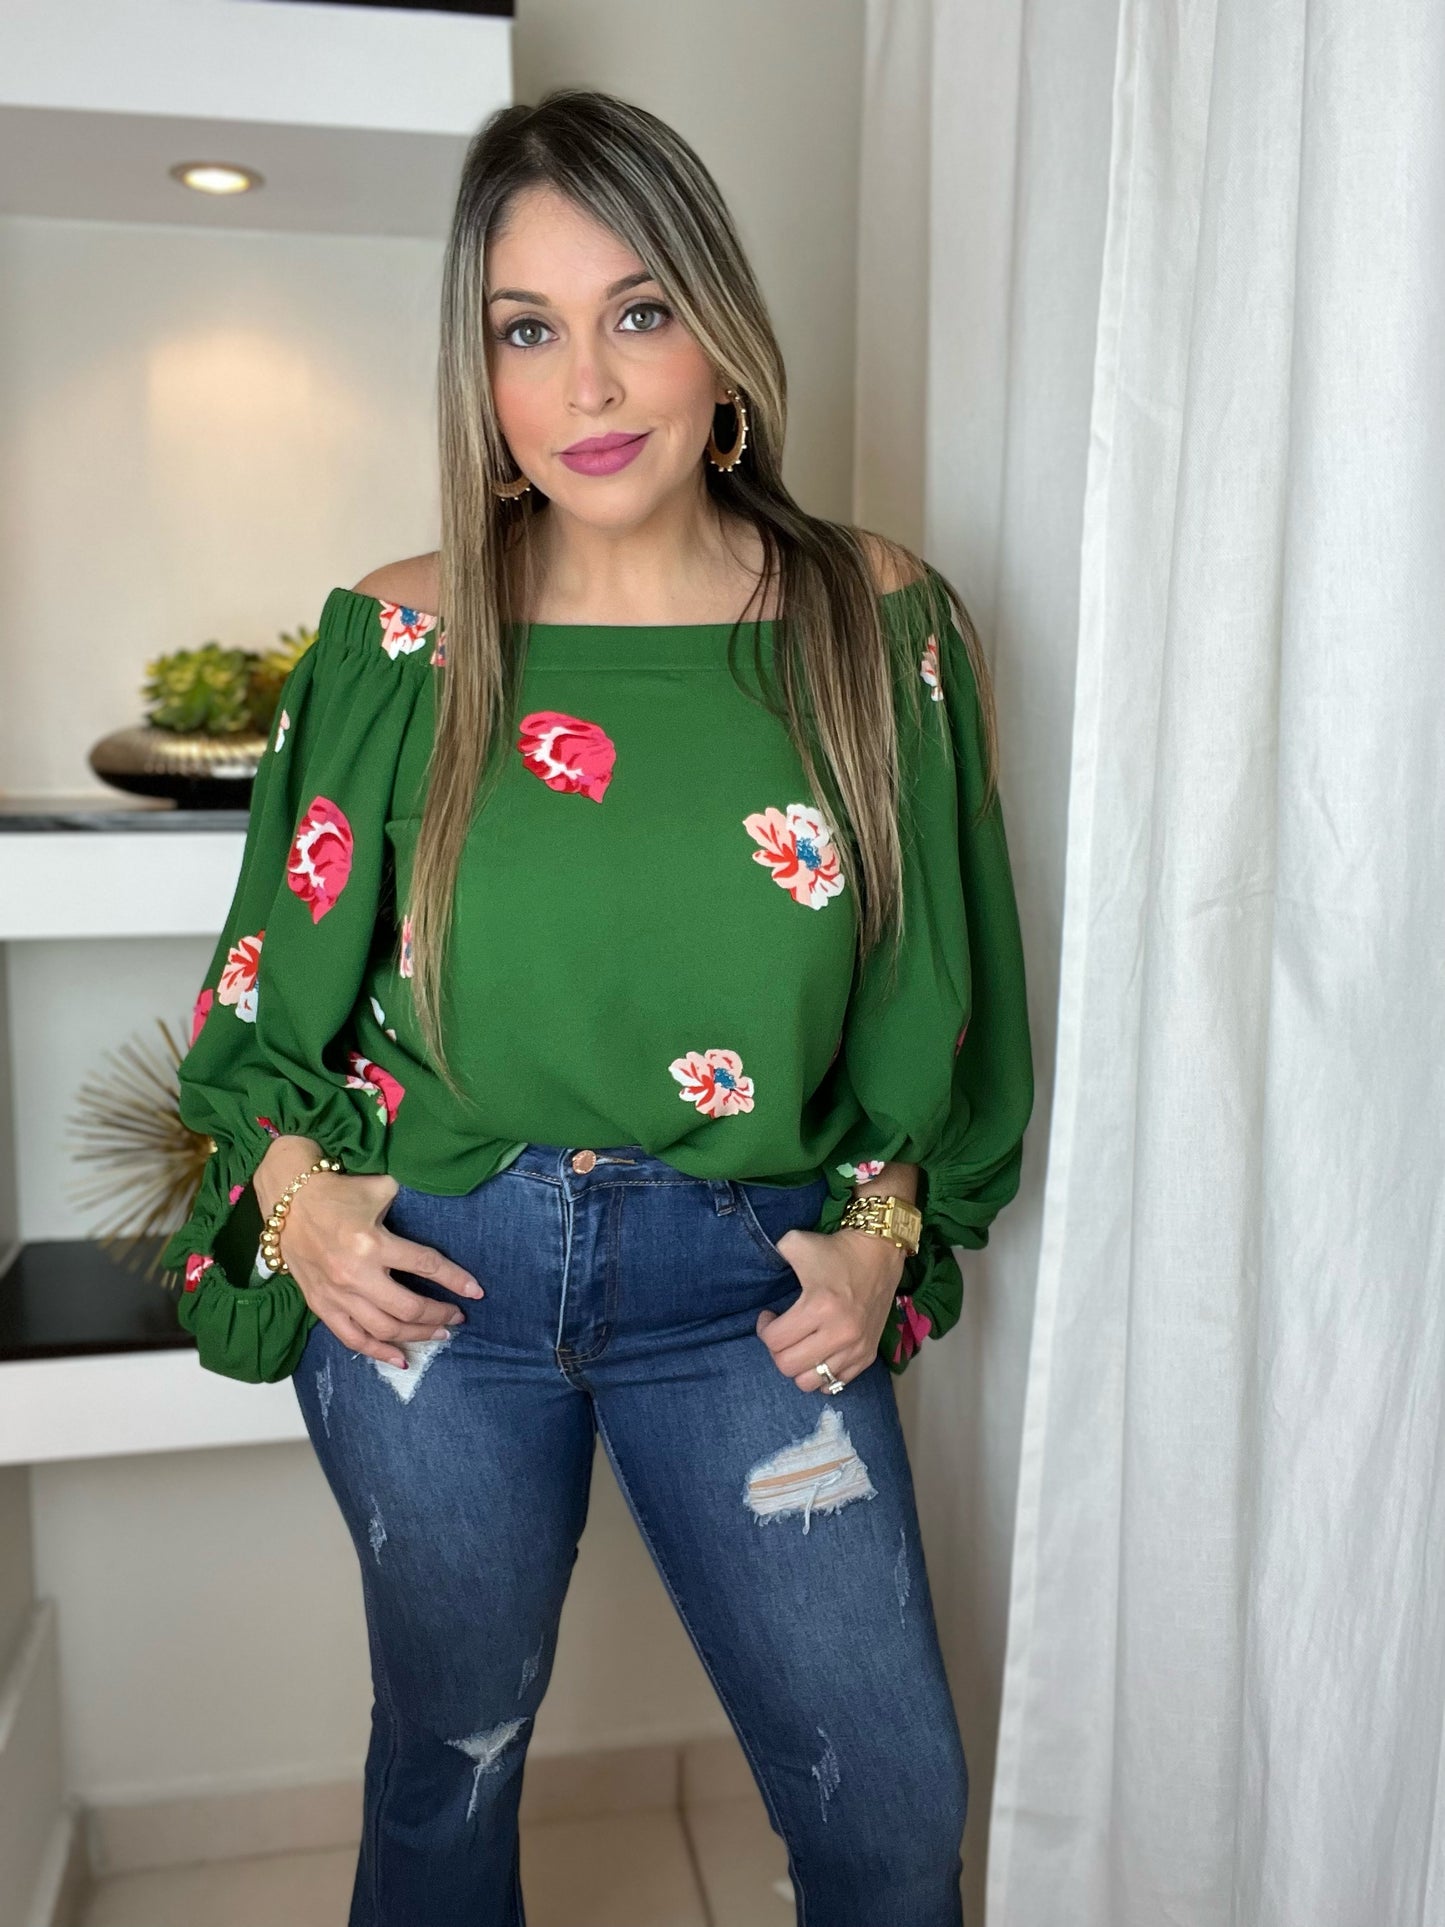 Floral Off the Shoulder Balloon Sleeve Top